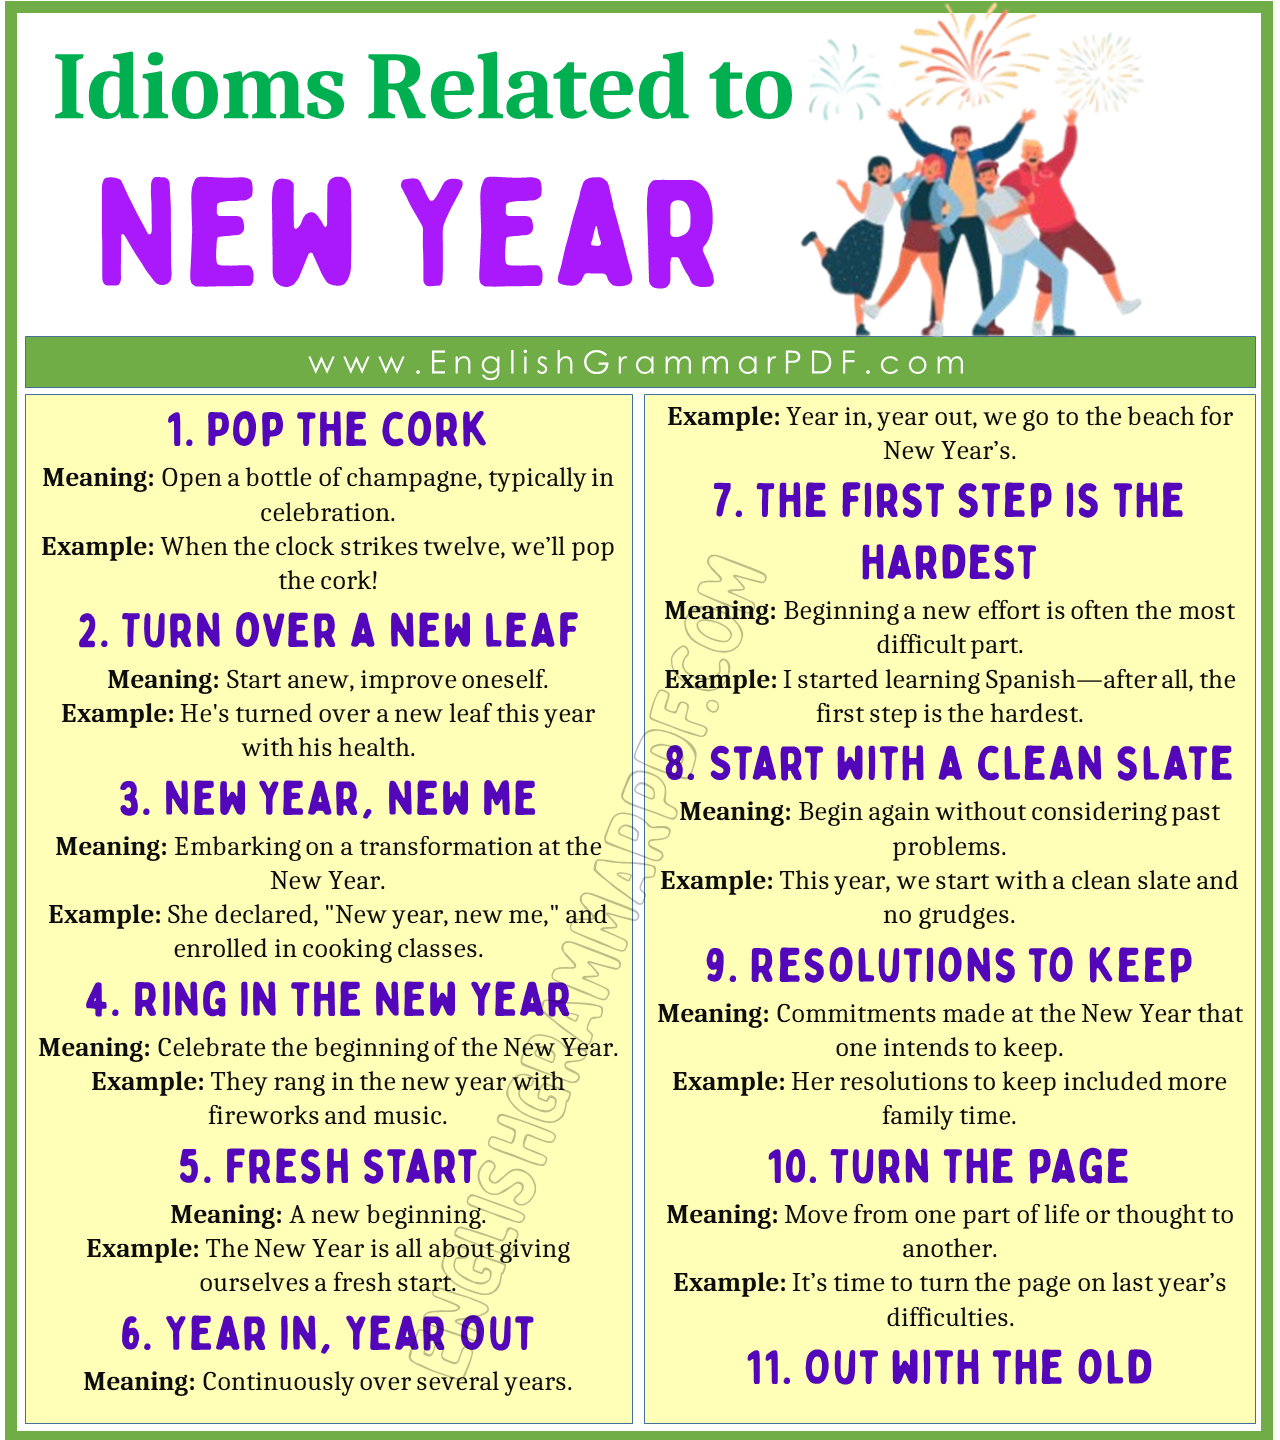 Idioms Related to the New Year